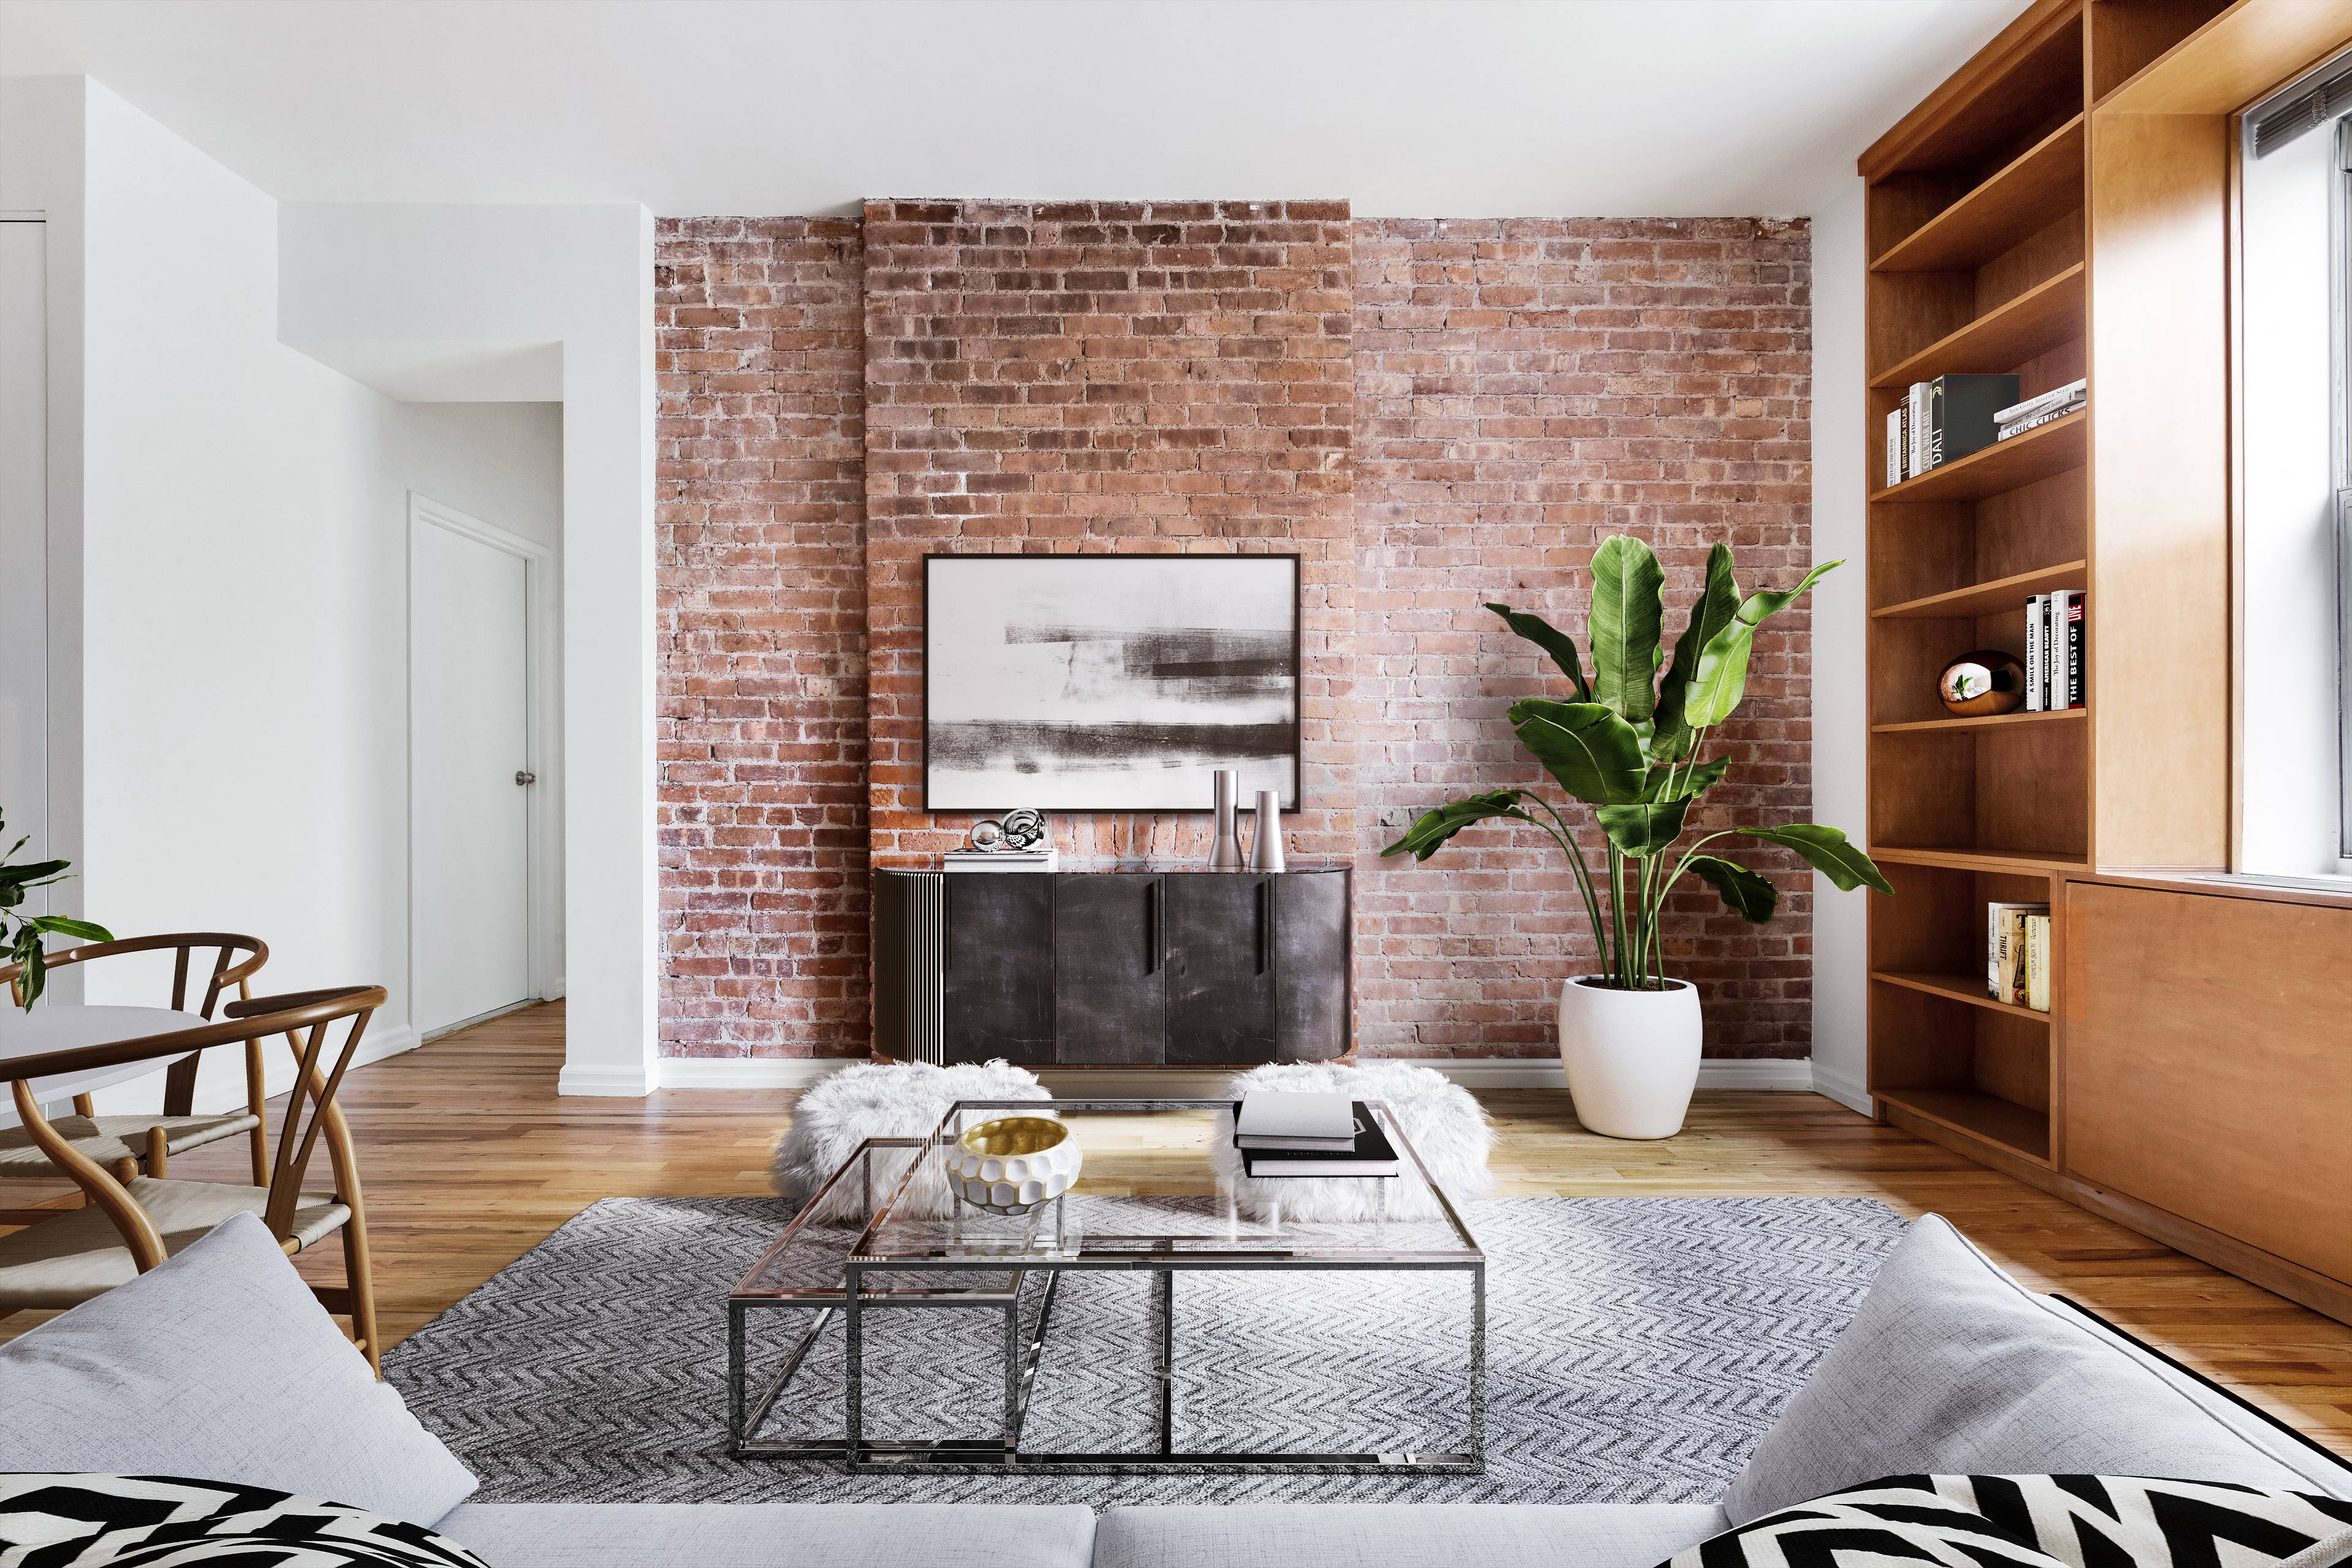 Move right into this renovated one bedroom home located in the highly desirable Meatpacking District !